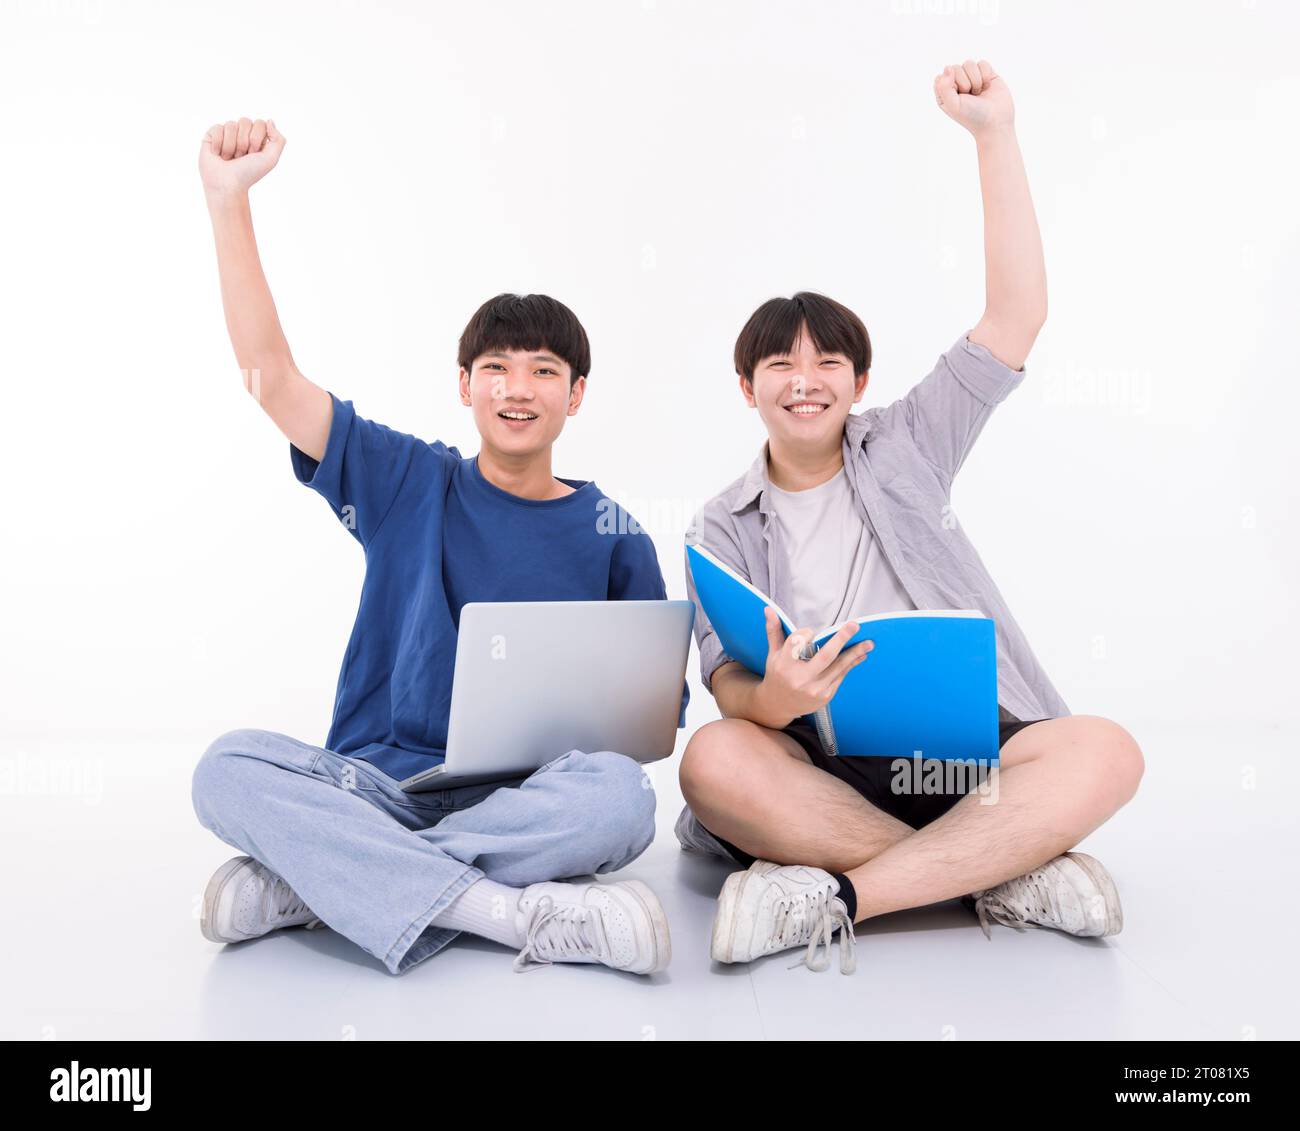 Two smart teenager students  celebrating their test score together. Stock Photo